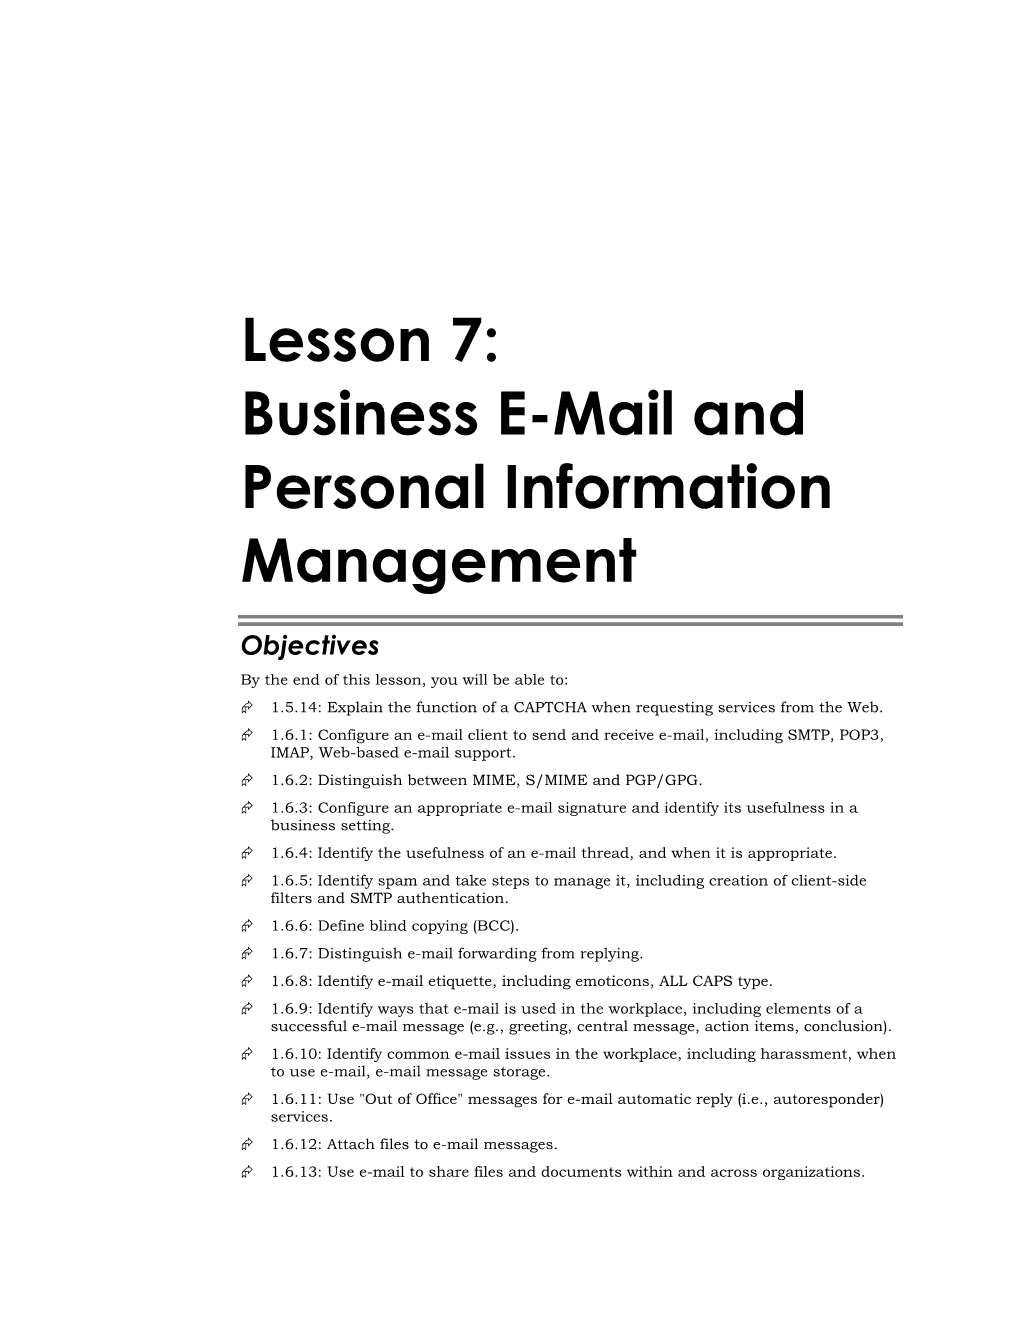 Business E-Mail and Personal Information Management